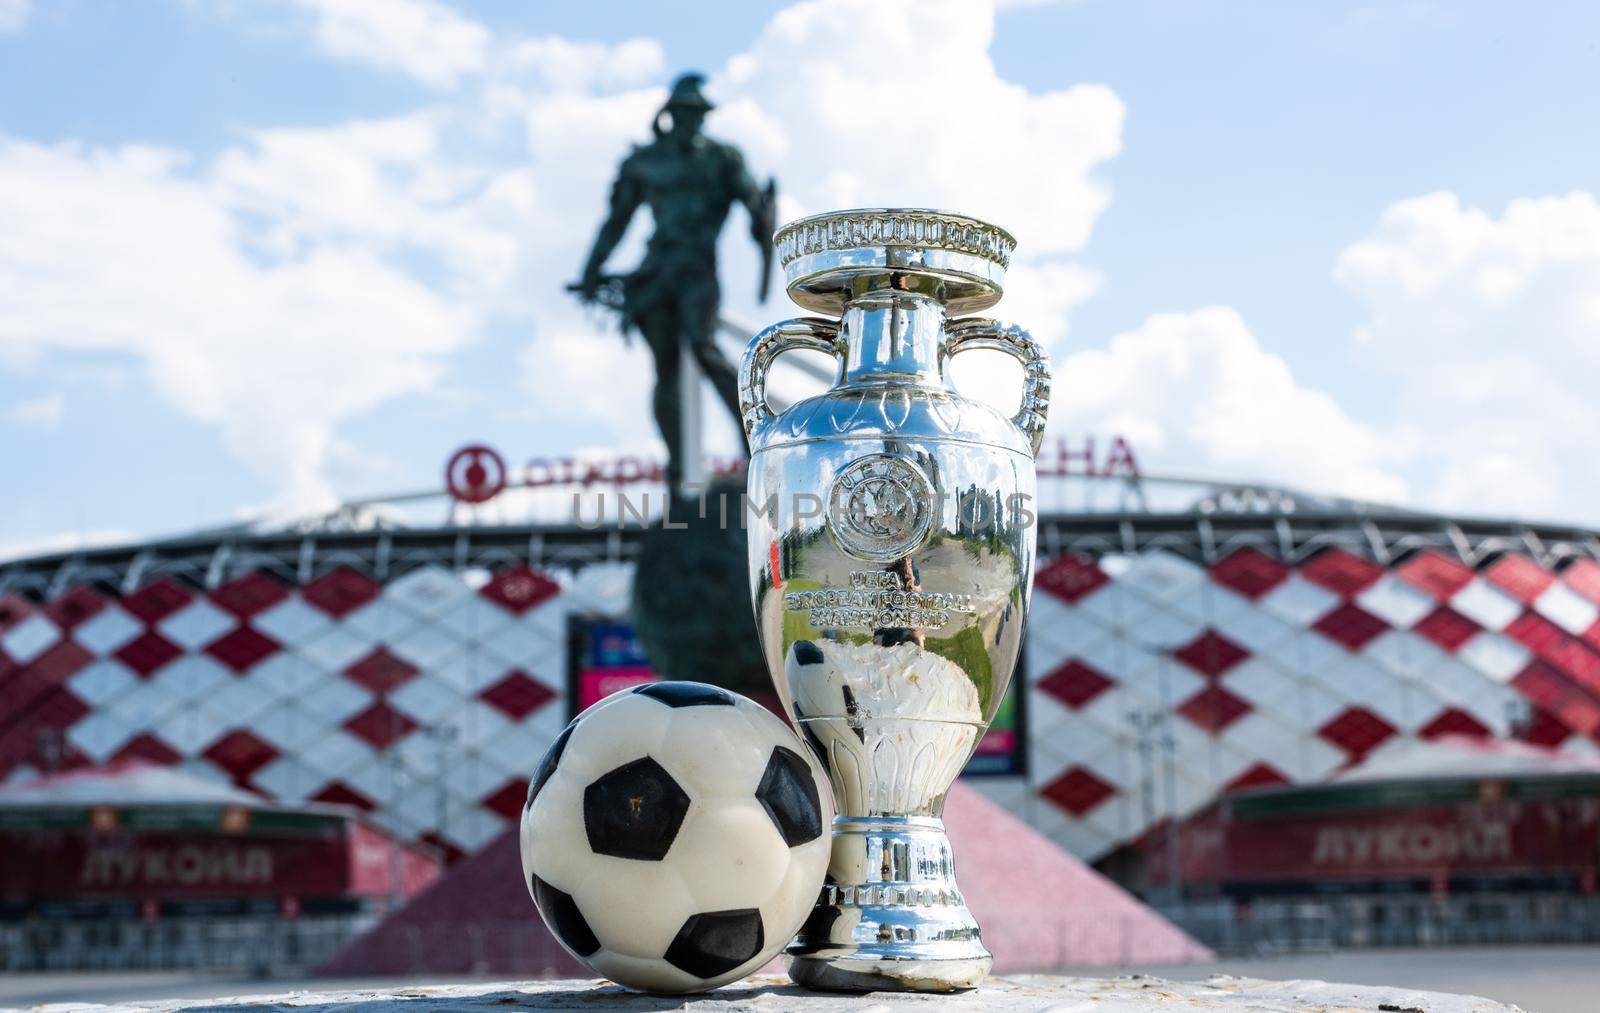 June 14, 2021, Moscow, Russia. European Football Championship Cup in front of Spartak Stadium - Otkrytie Arena.